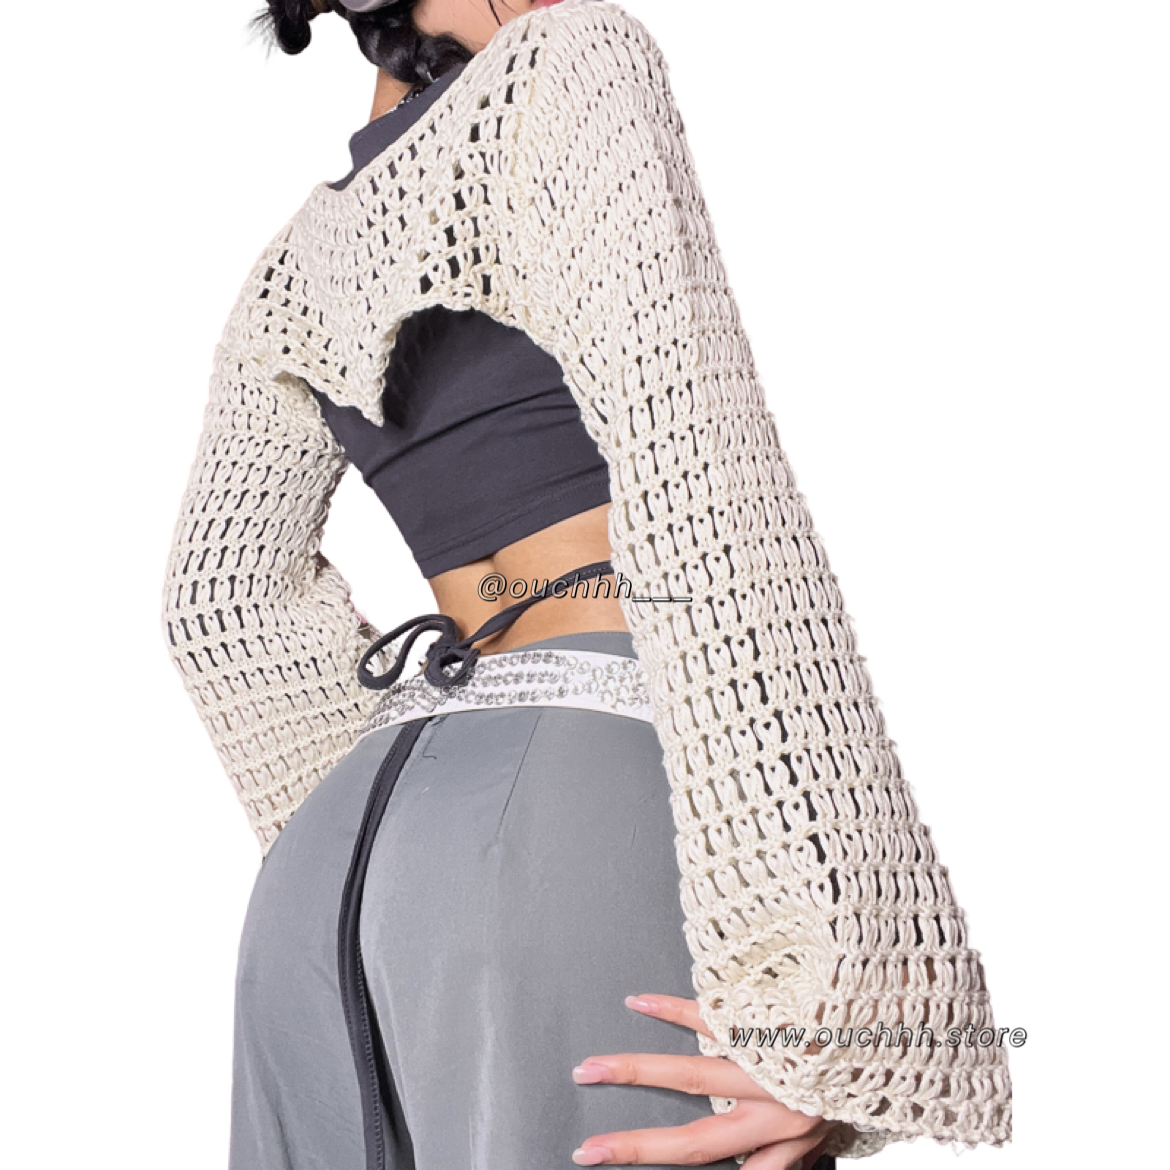 Crochet Extreme Cropped top